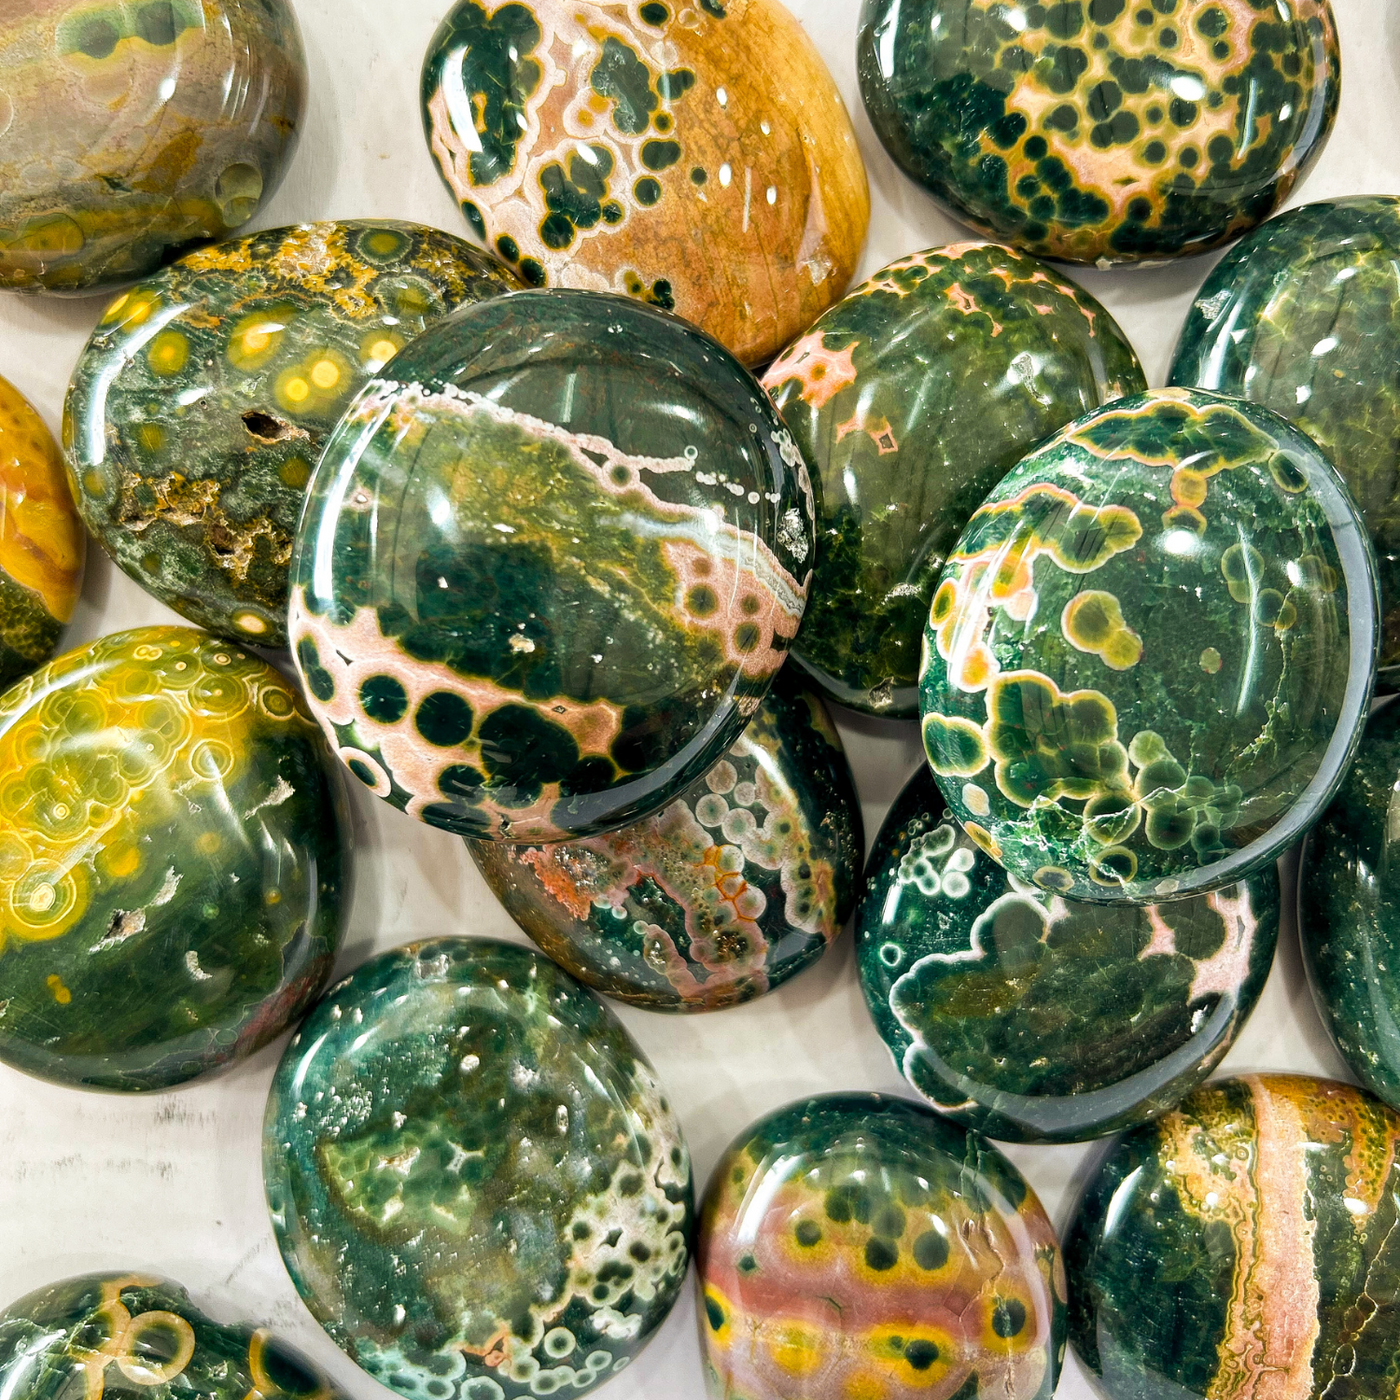 collection of several Kambamby Ocean Jasper touchstone at Tucson Gem Show displaying variety of colors, patterns and sizes by Energy Muse